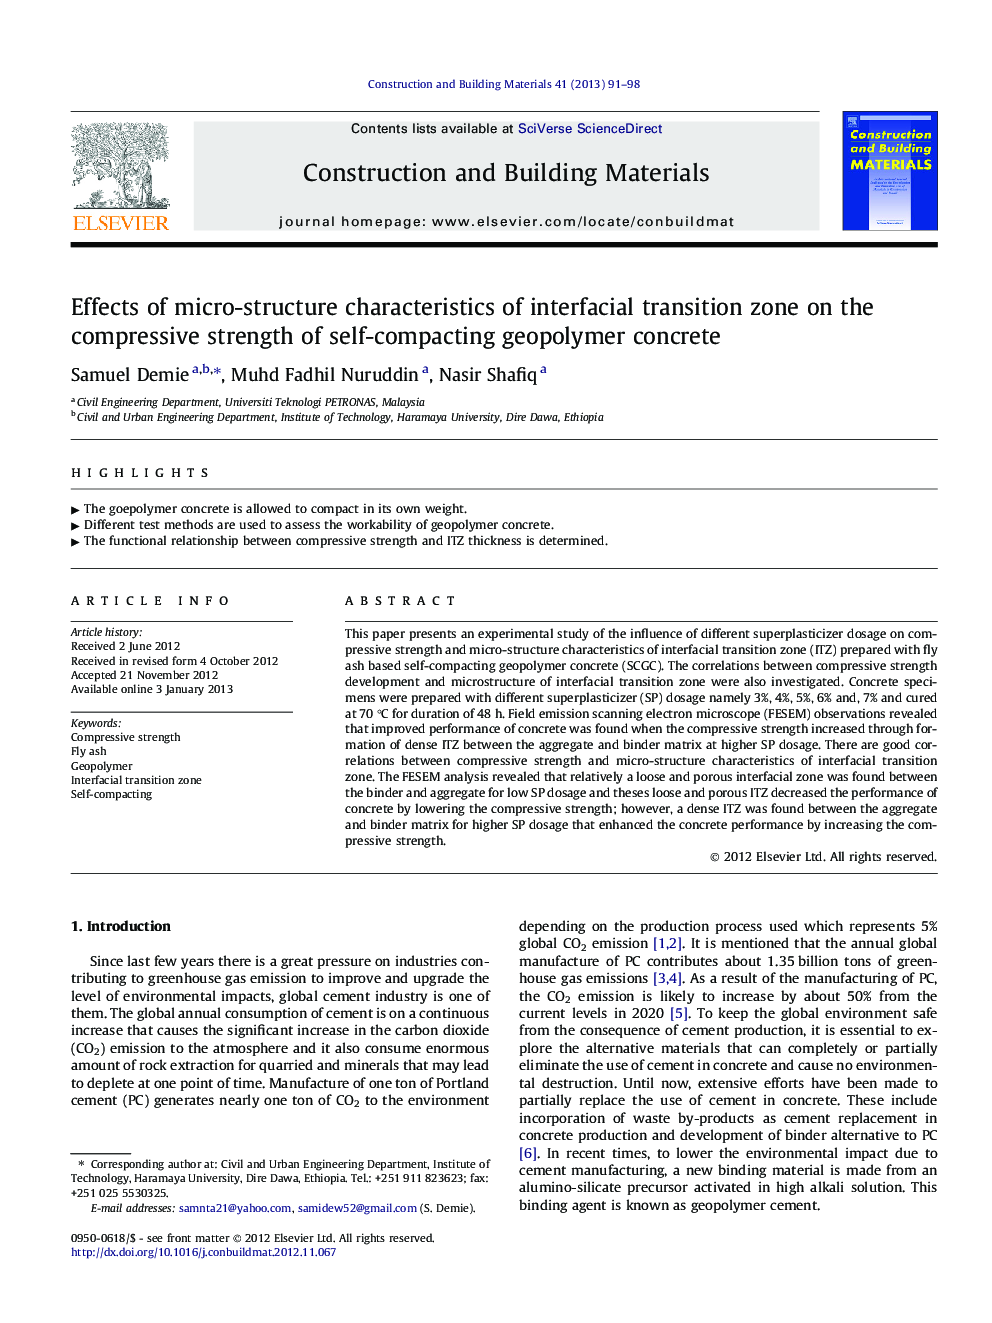 Effects of micro-structure characteristics of interfacial transition zone on the compressive strength of self-compacting geopolymer concrete